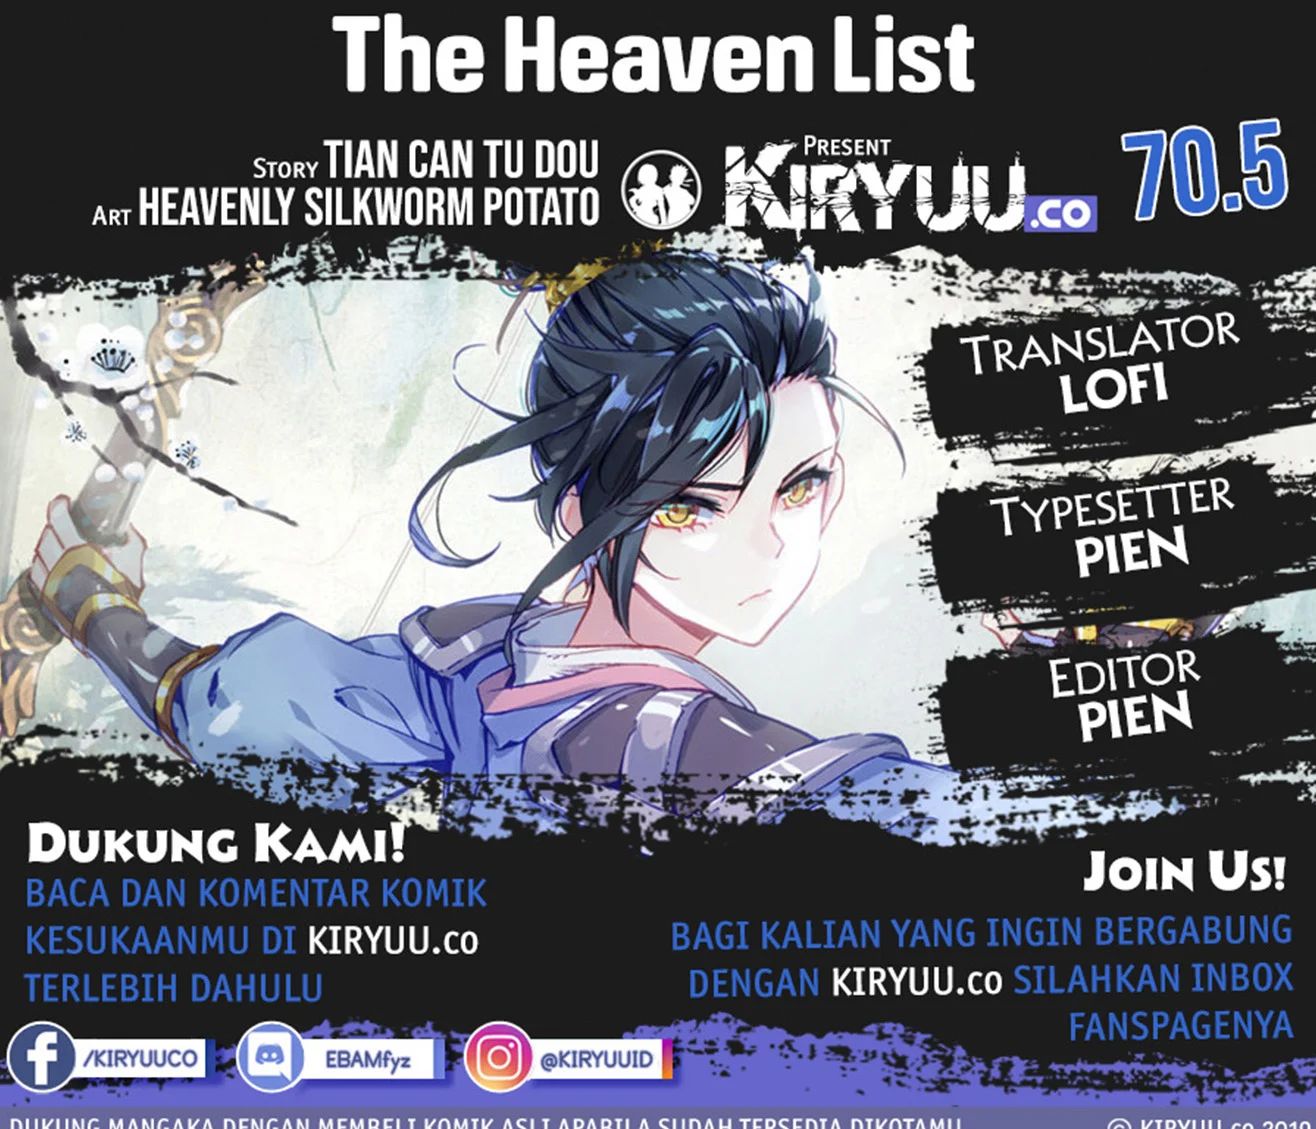 The Heaven’s List Chapter 70.5